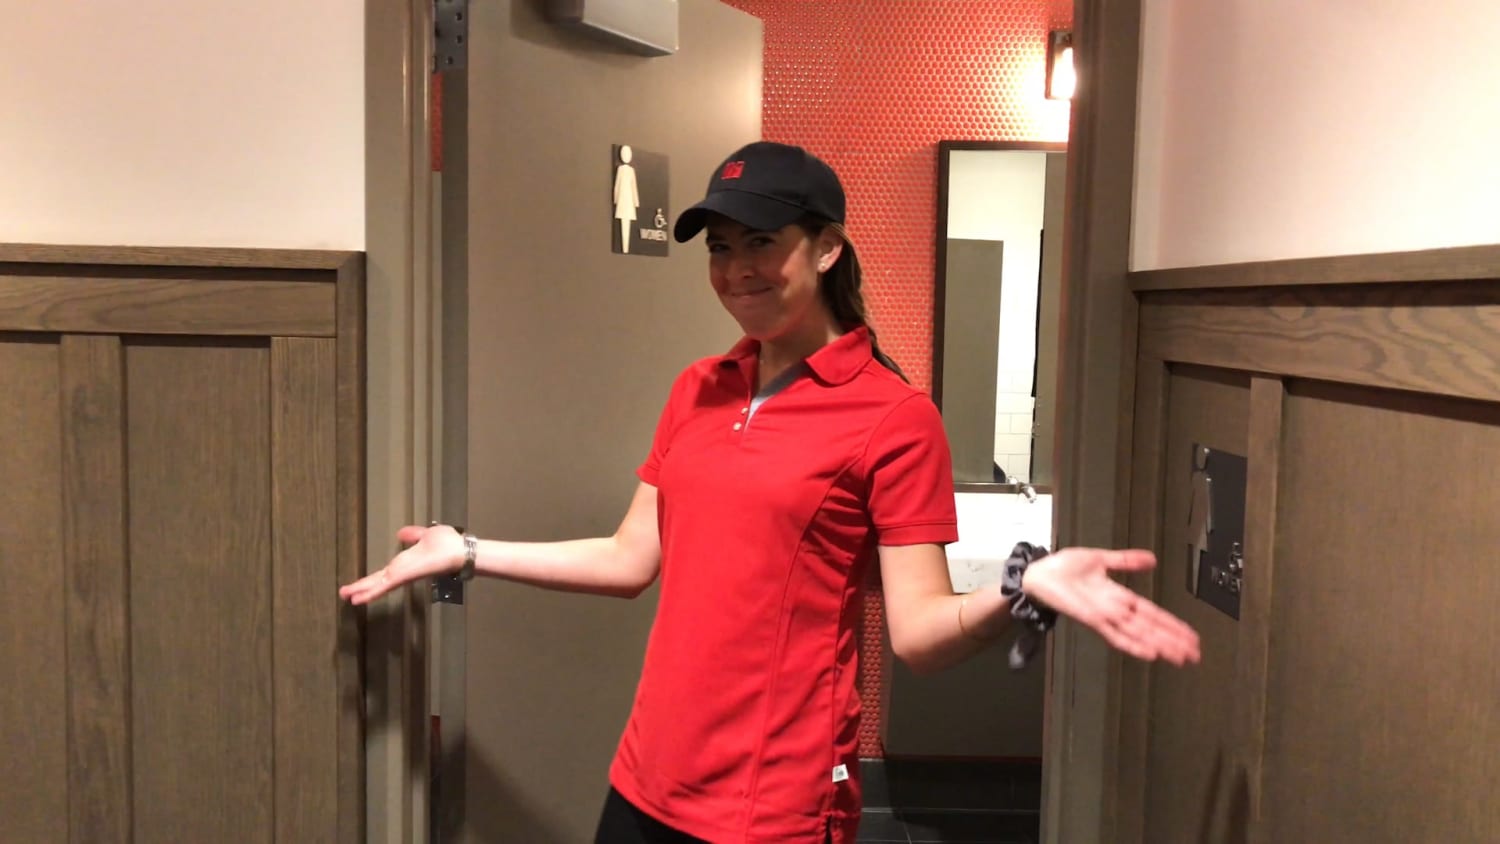 Here's what it's like to work at one of the busiest Chick-fil-A locations in America